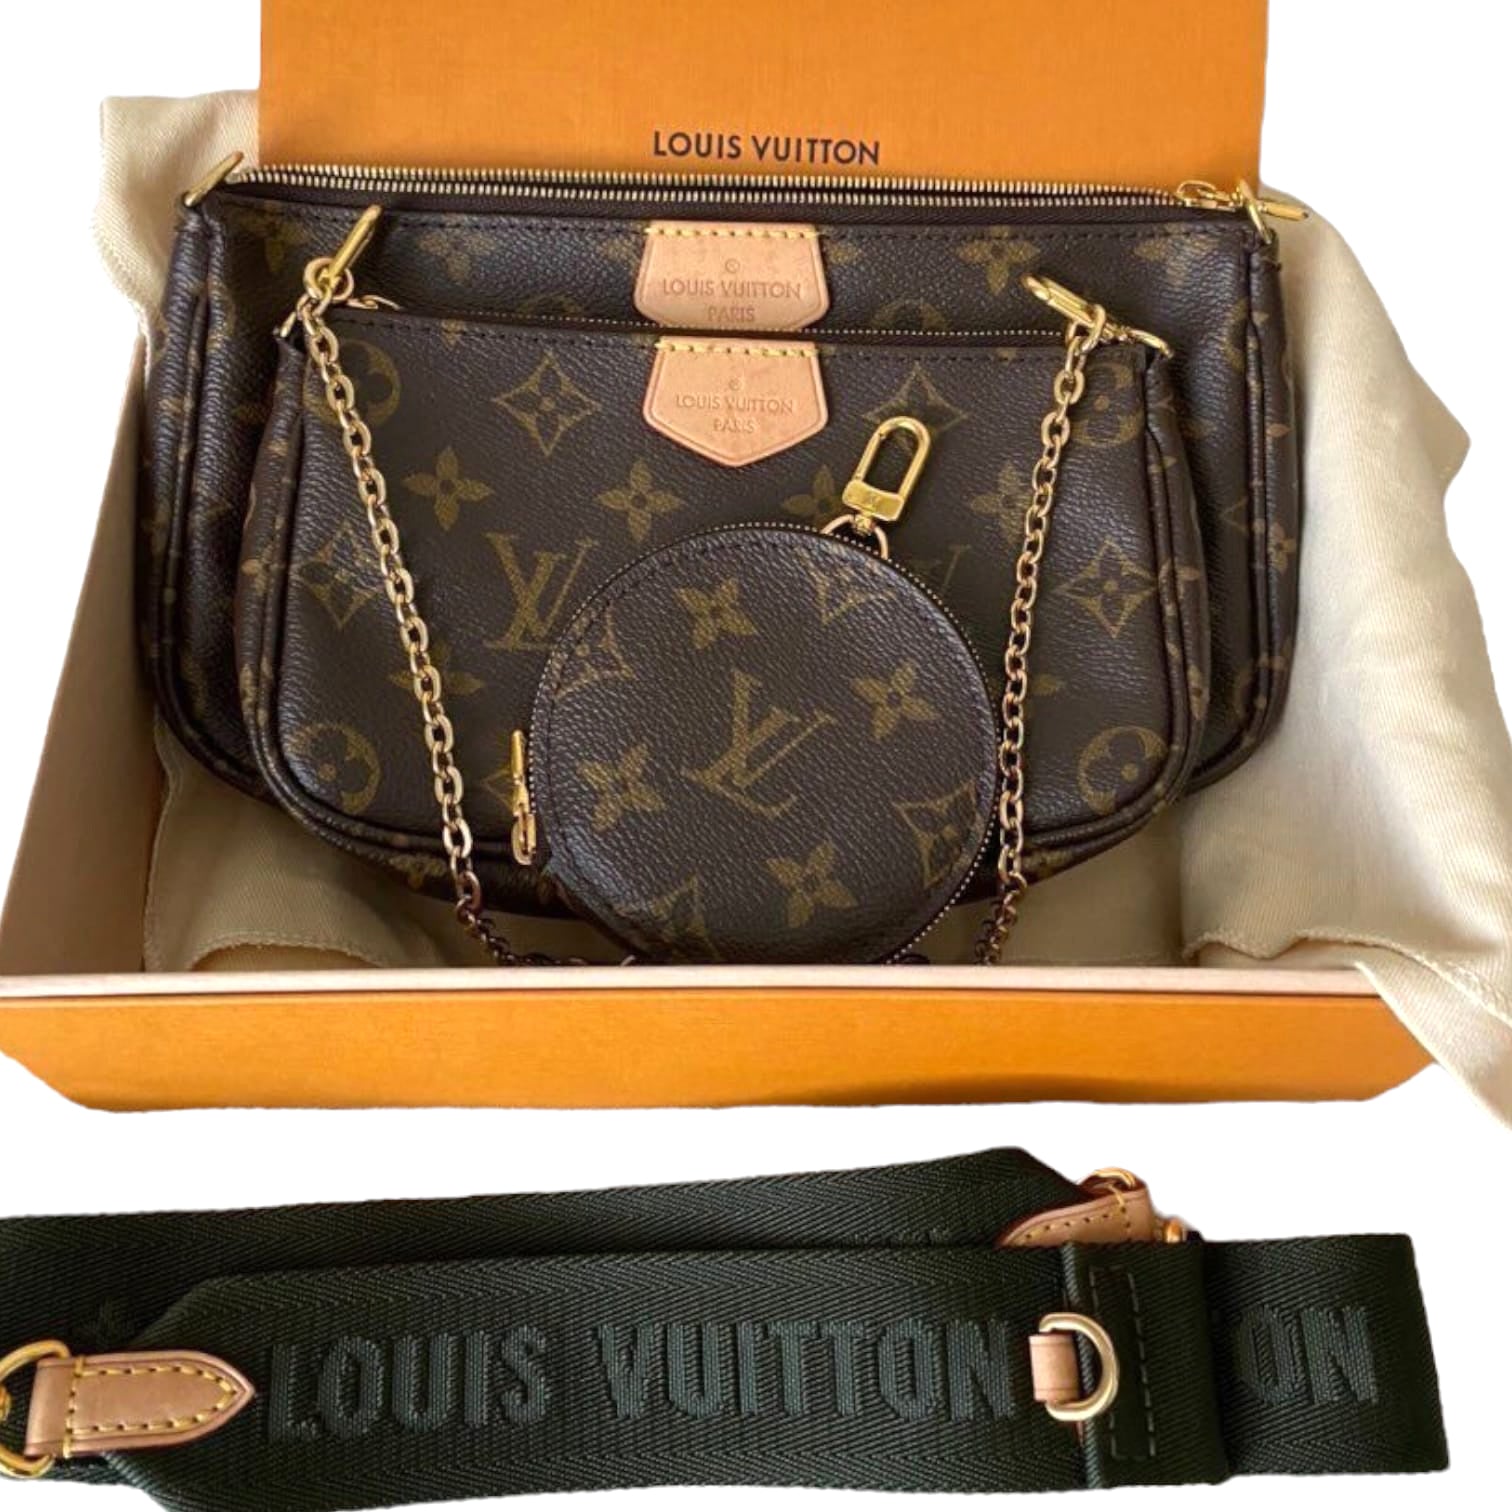 LV POCHETTE MÉTIS DHGATE REVIEW- WATCH IN 1080P! Shari's Life of